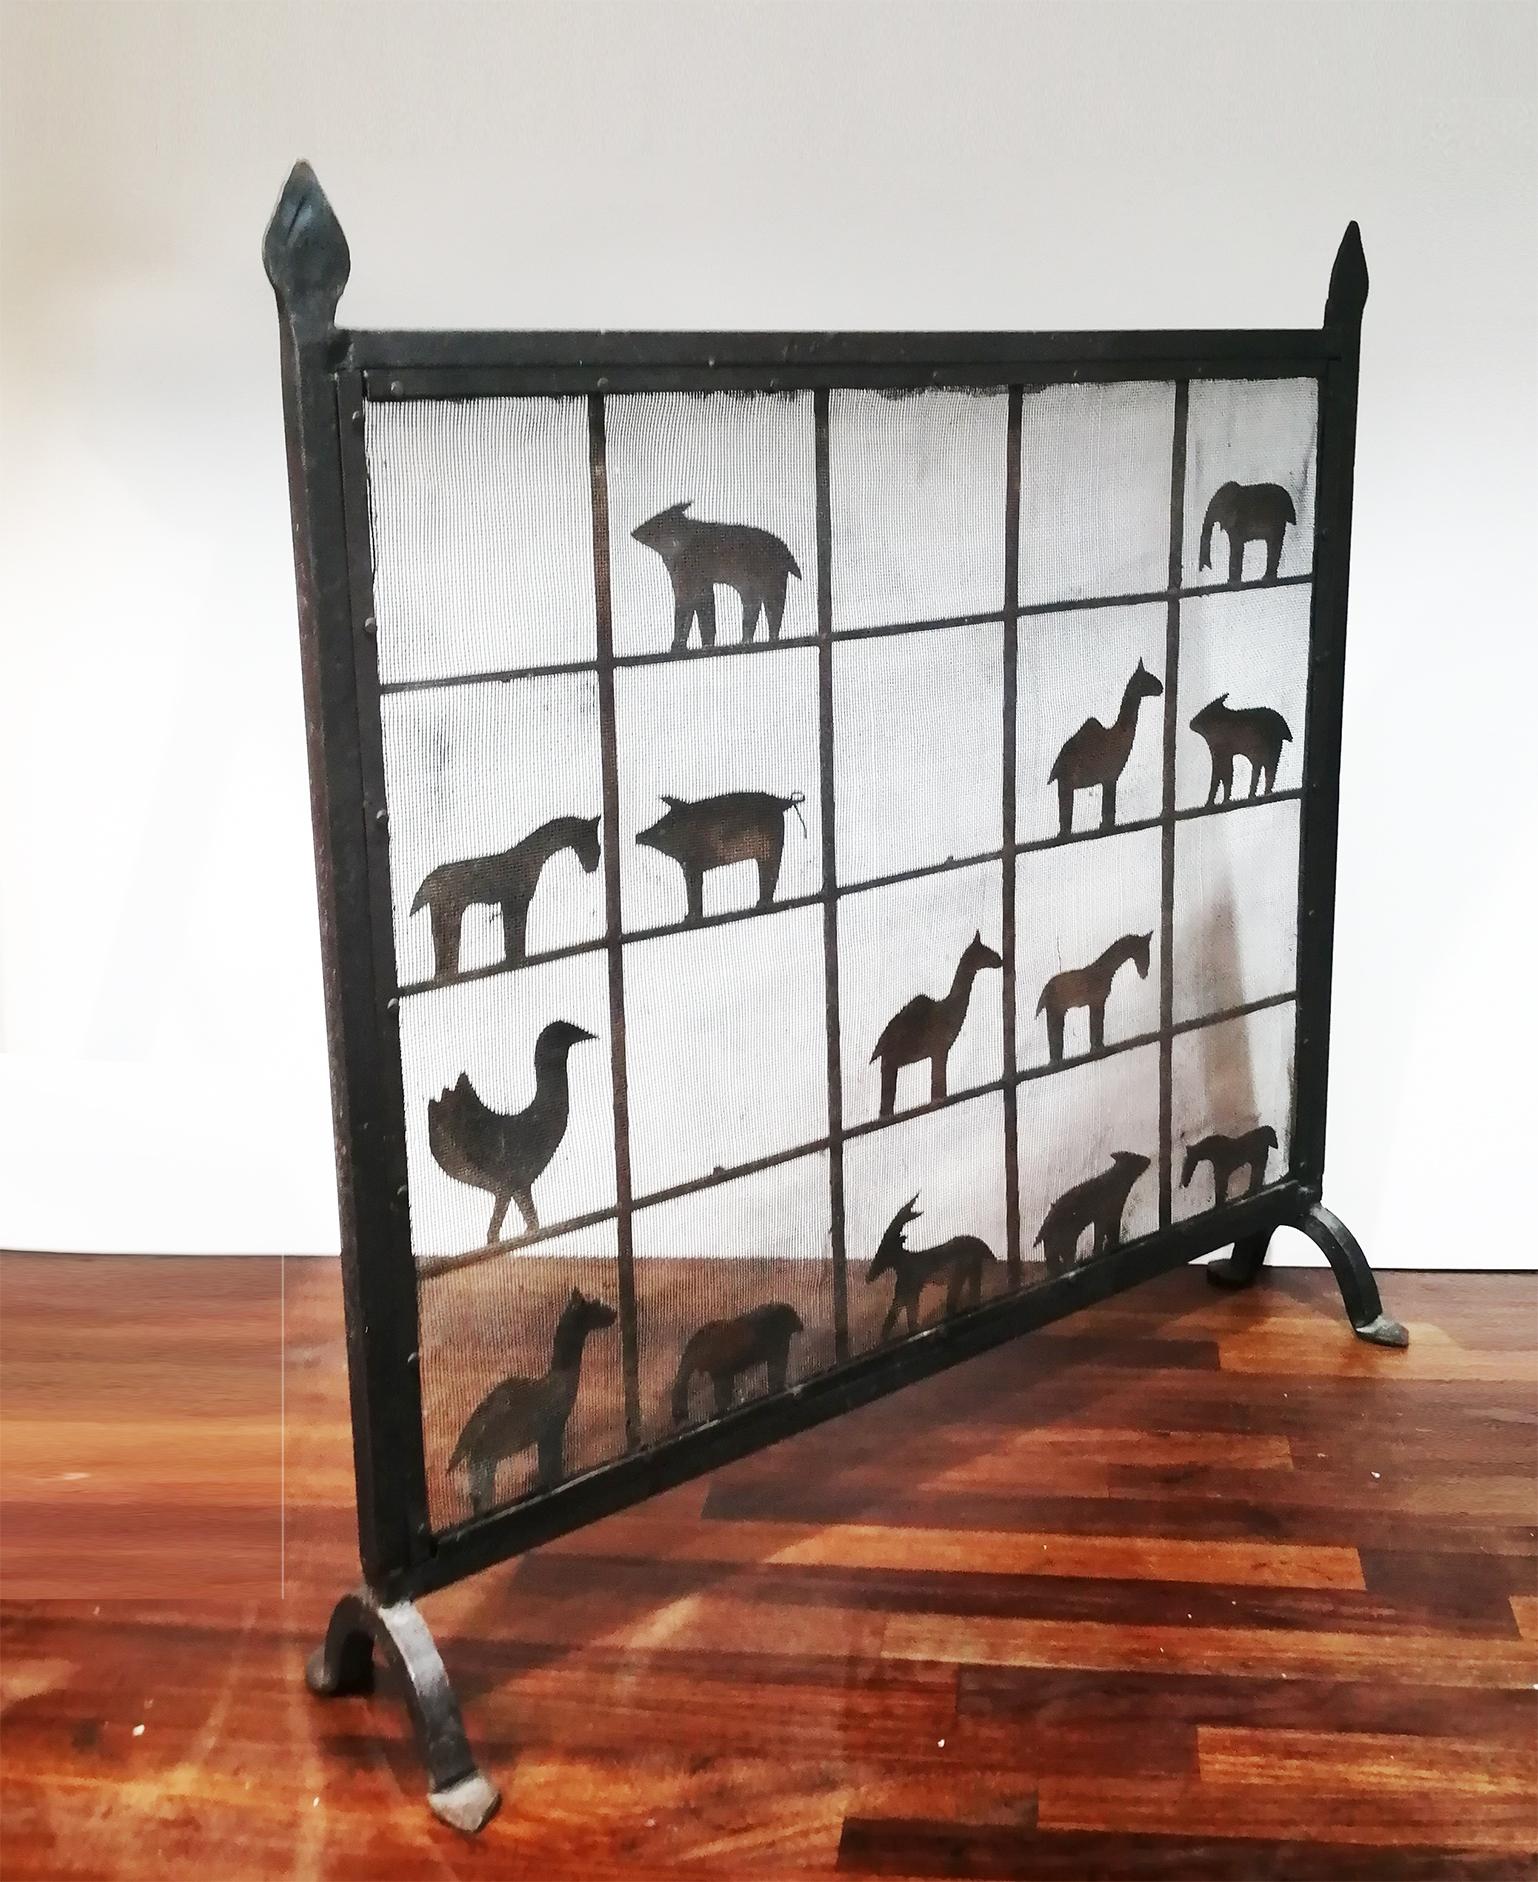 Panel fire screen iron forged with wild and farm animals

Original rustic fire screen arrester for the fireplace of a country house or for an urban environment. 

Relizadoa by hand with wrought iron structure and grate with animals in wrought